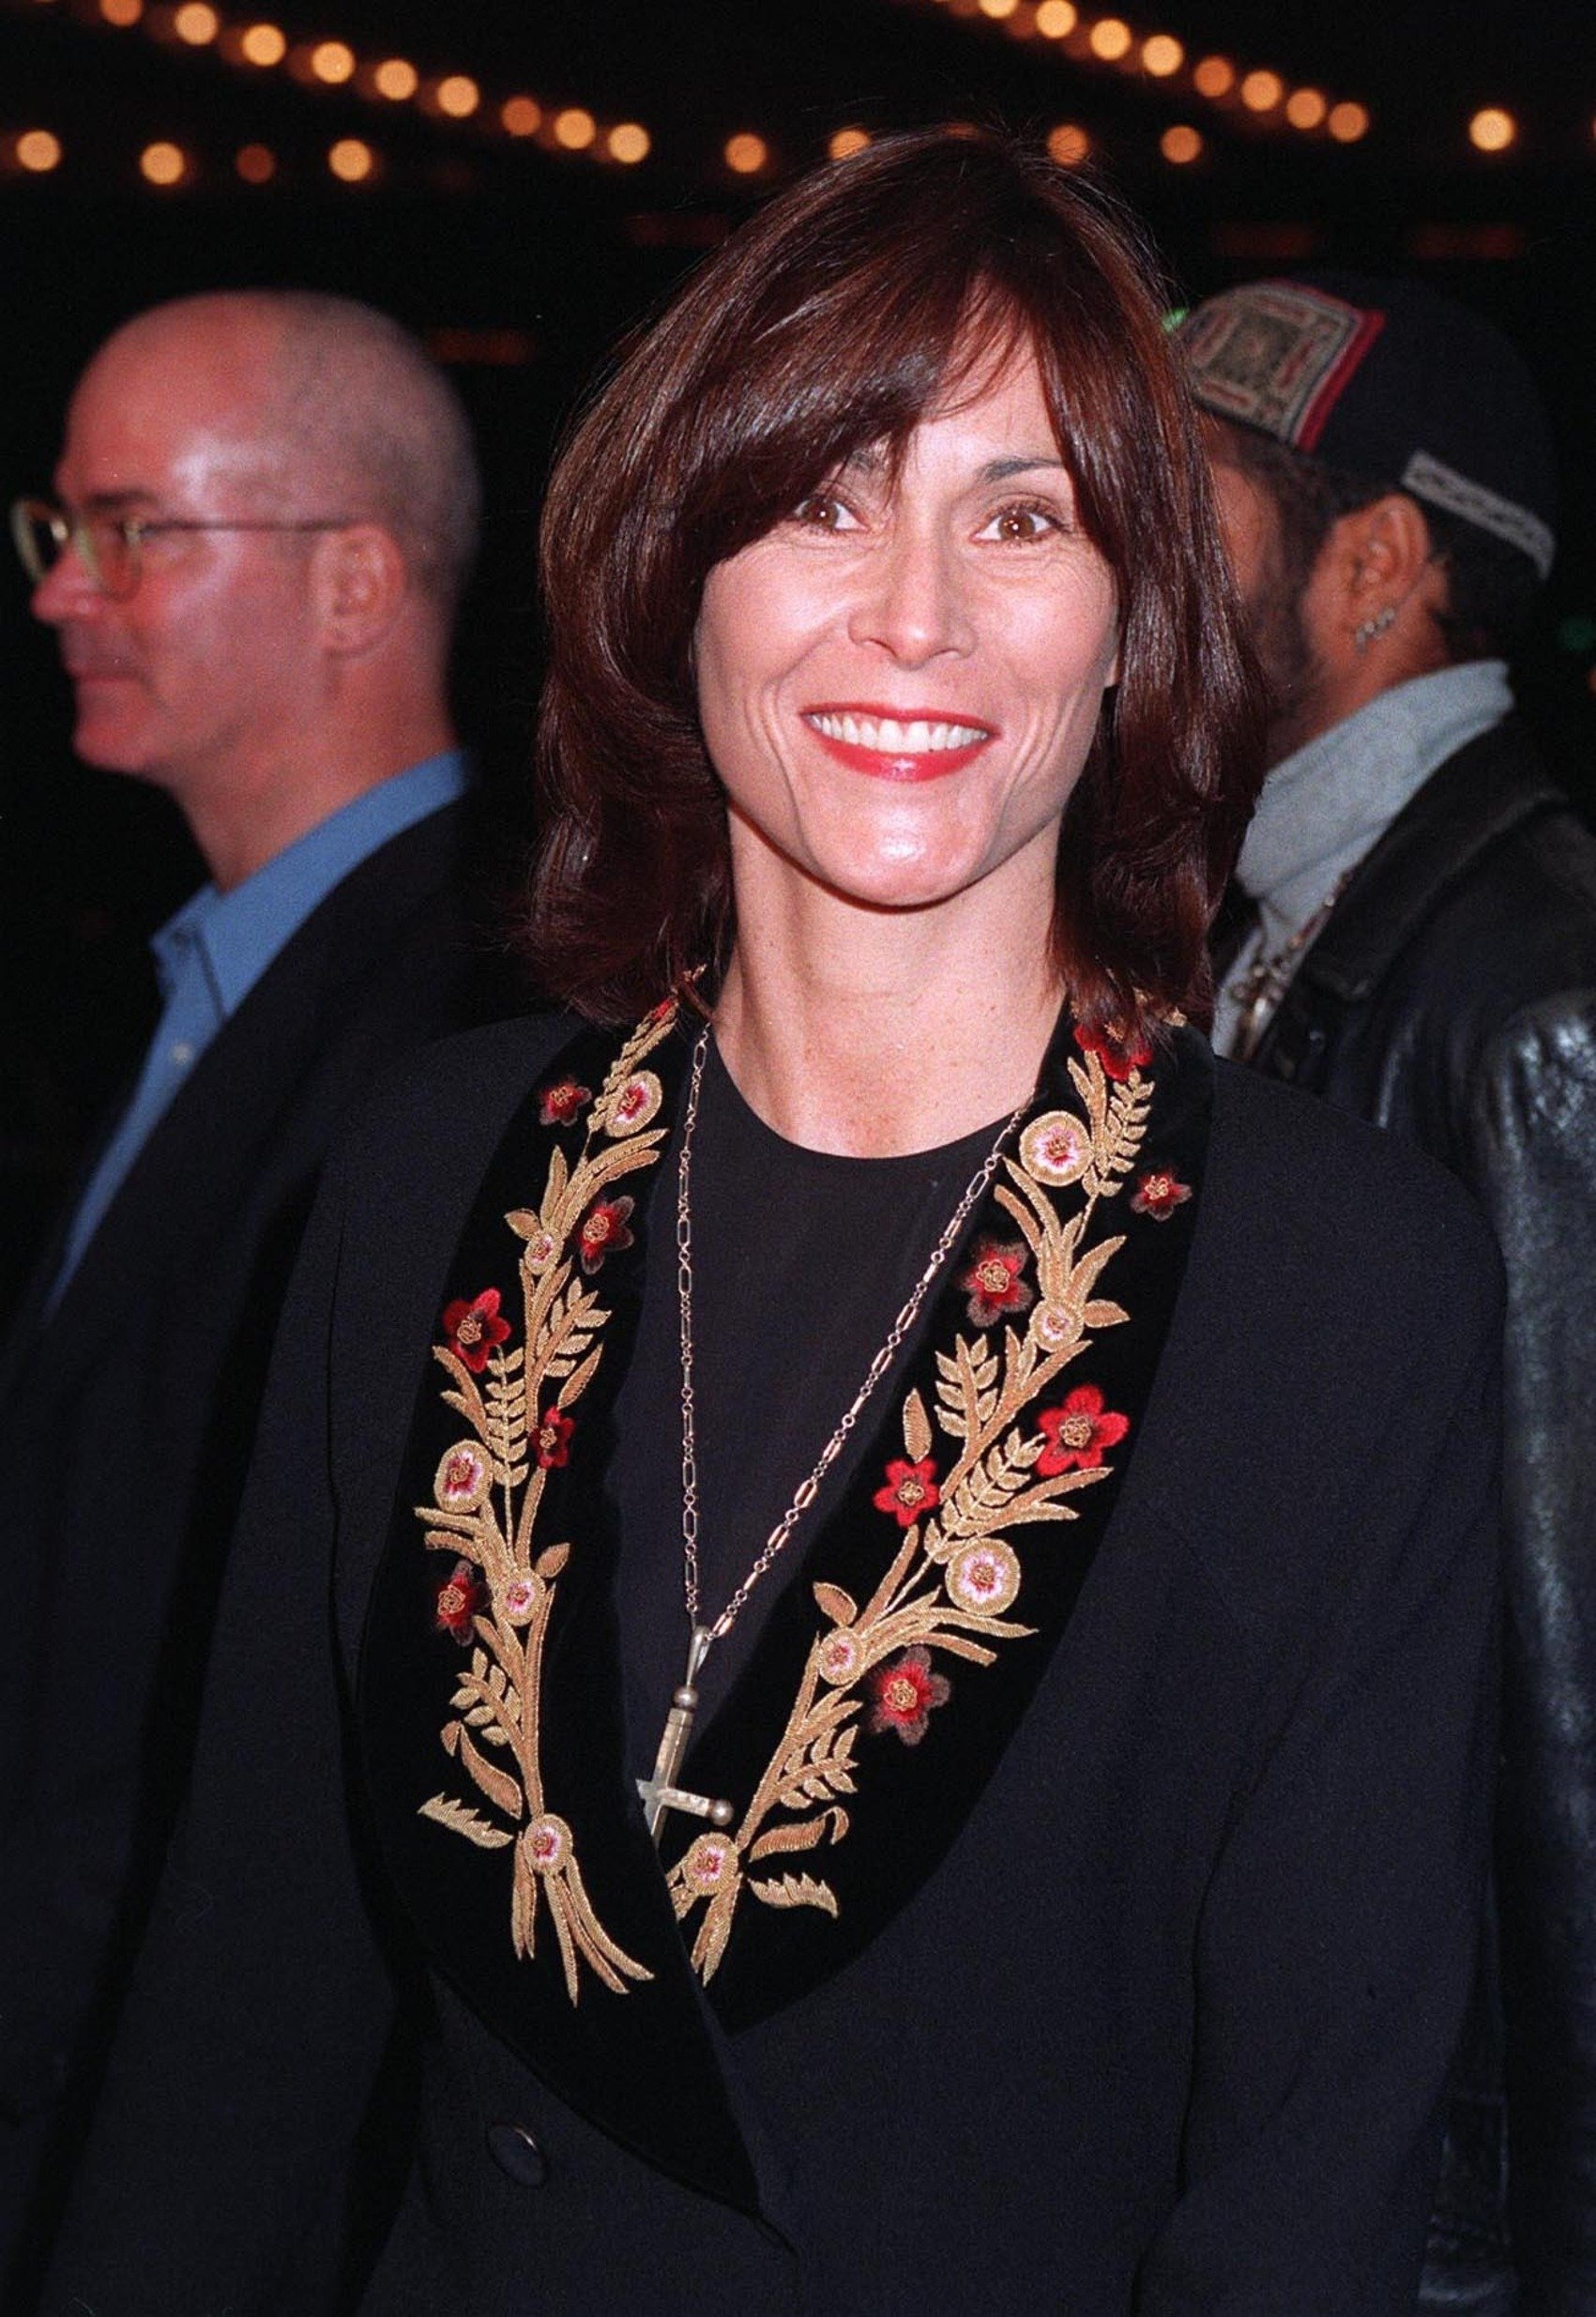 Kate Jackson on the red carpet at the premiere of "One Night Stand" on November 12, 1997 | Source: Shutterstock